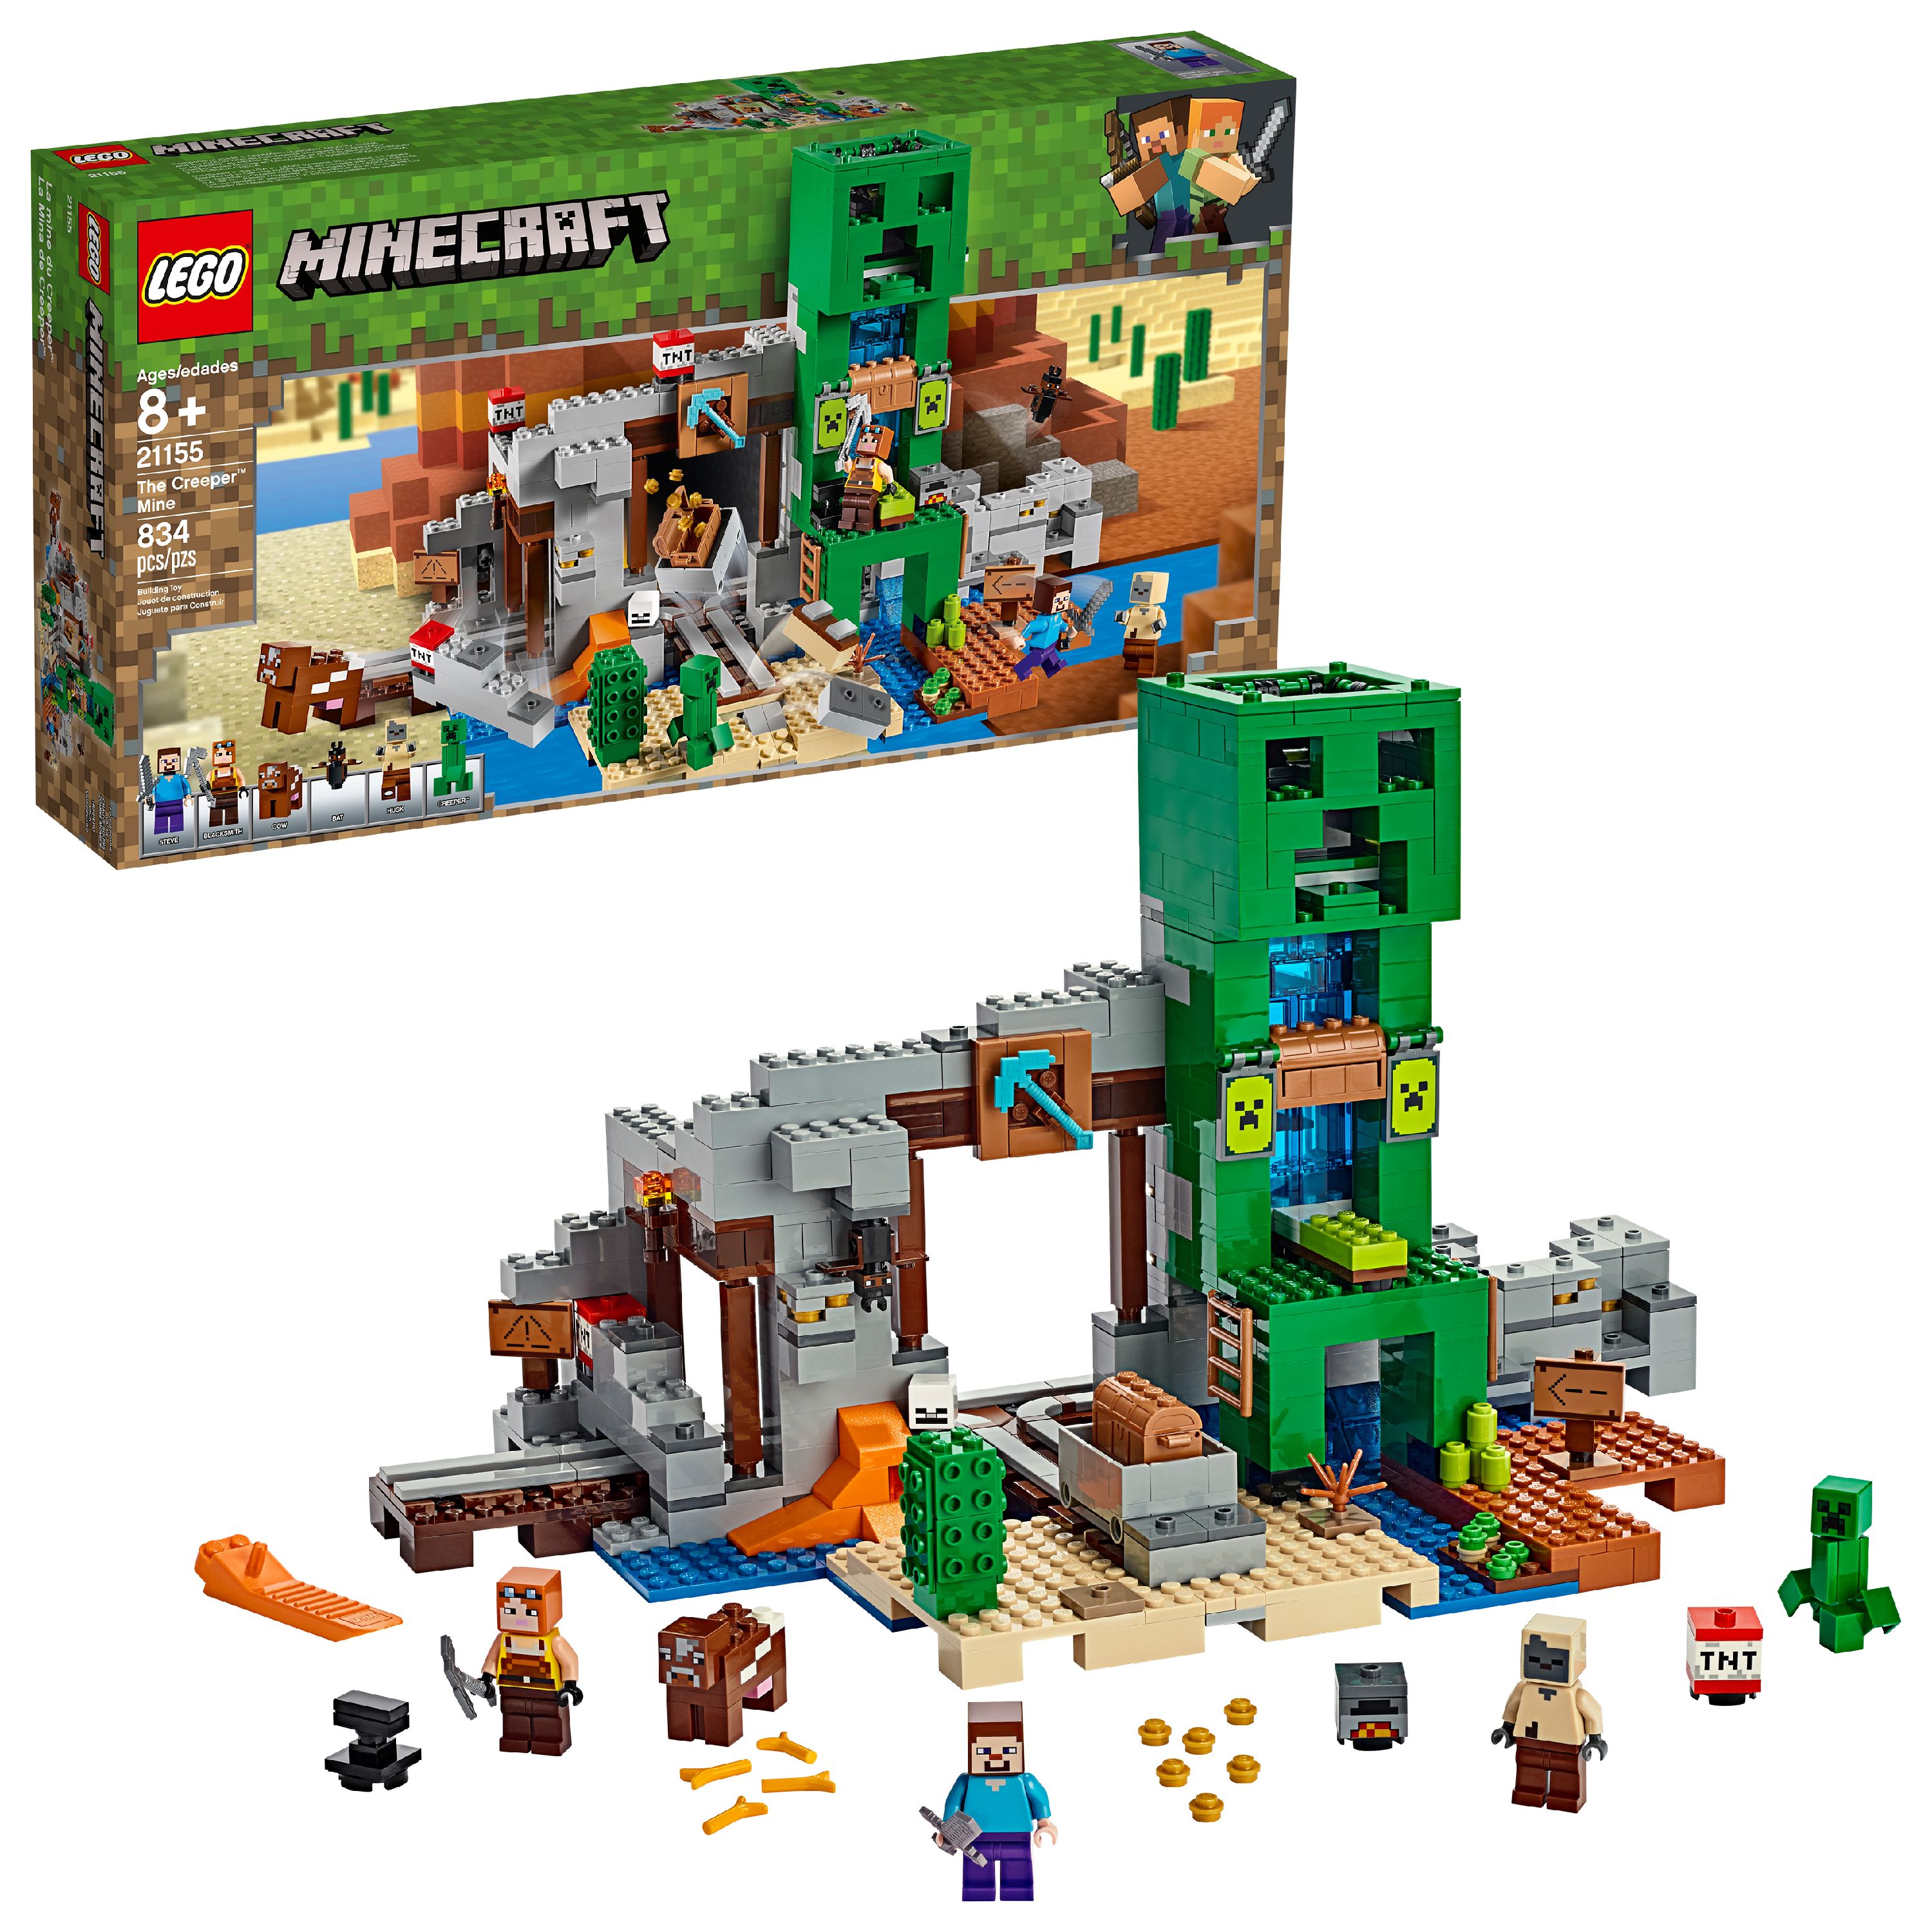 LEGO Minecraft The Creeper Mine 21155 Toy Rail Track Building Set (830 Pieces) - image 1 of 8